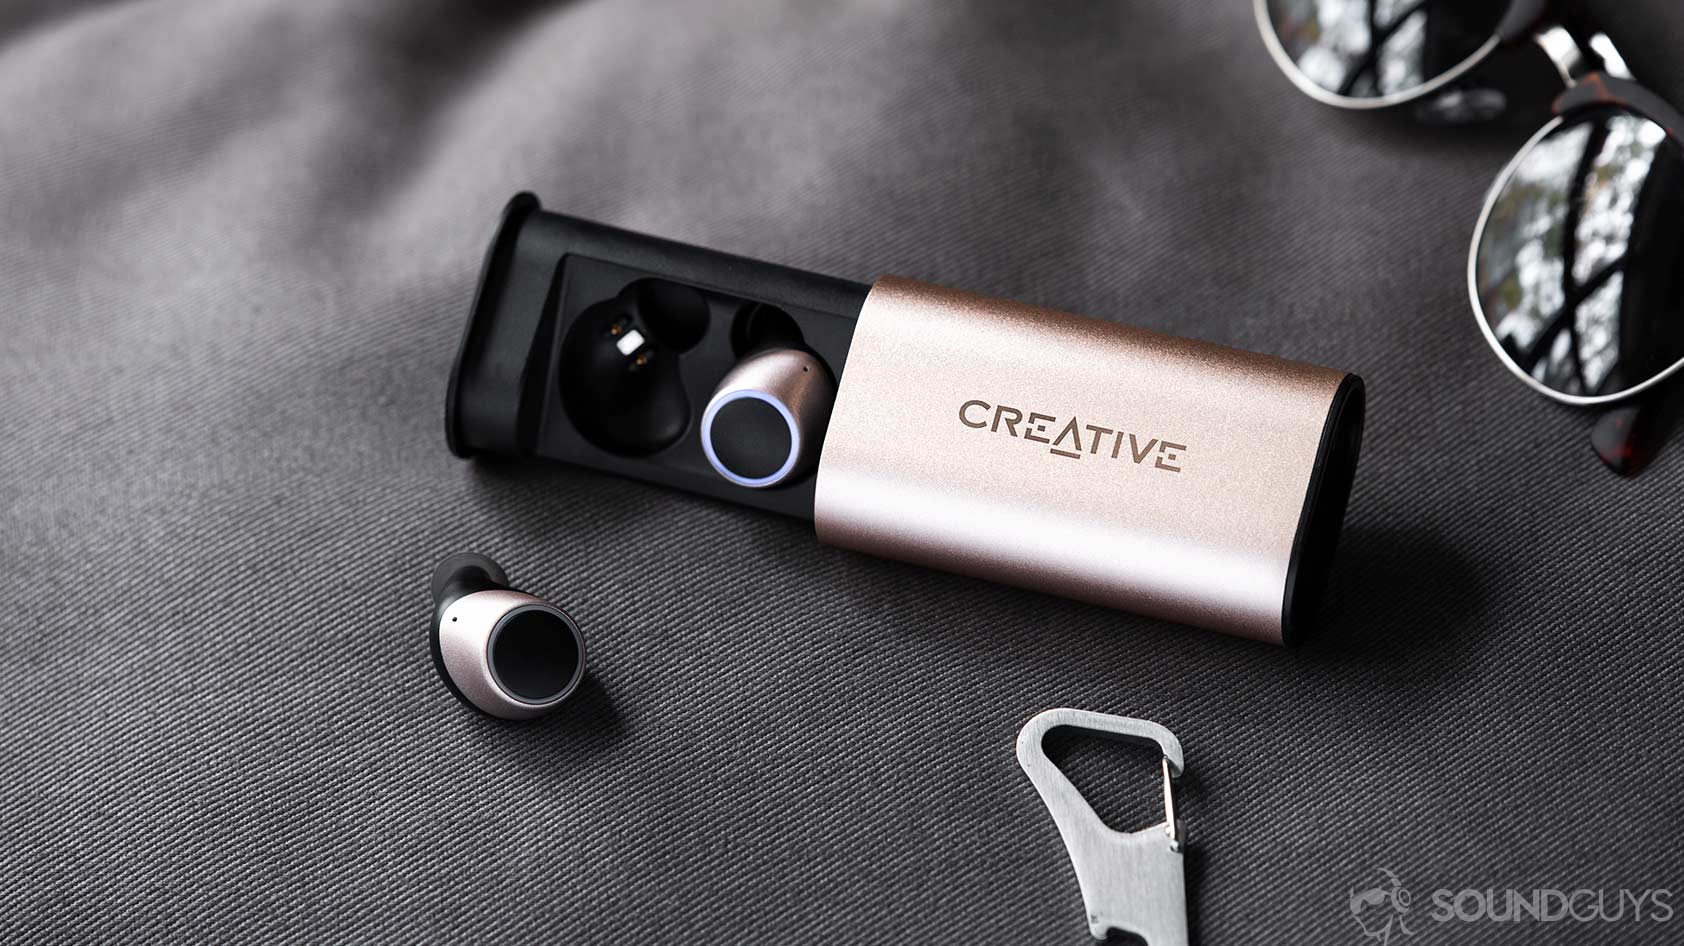 Creative Outlier Gold charging cases open earbuds in out